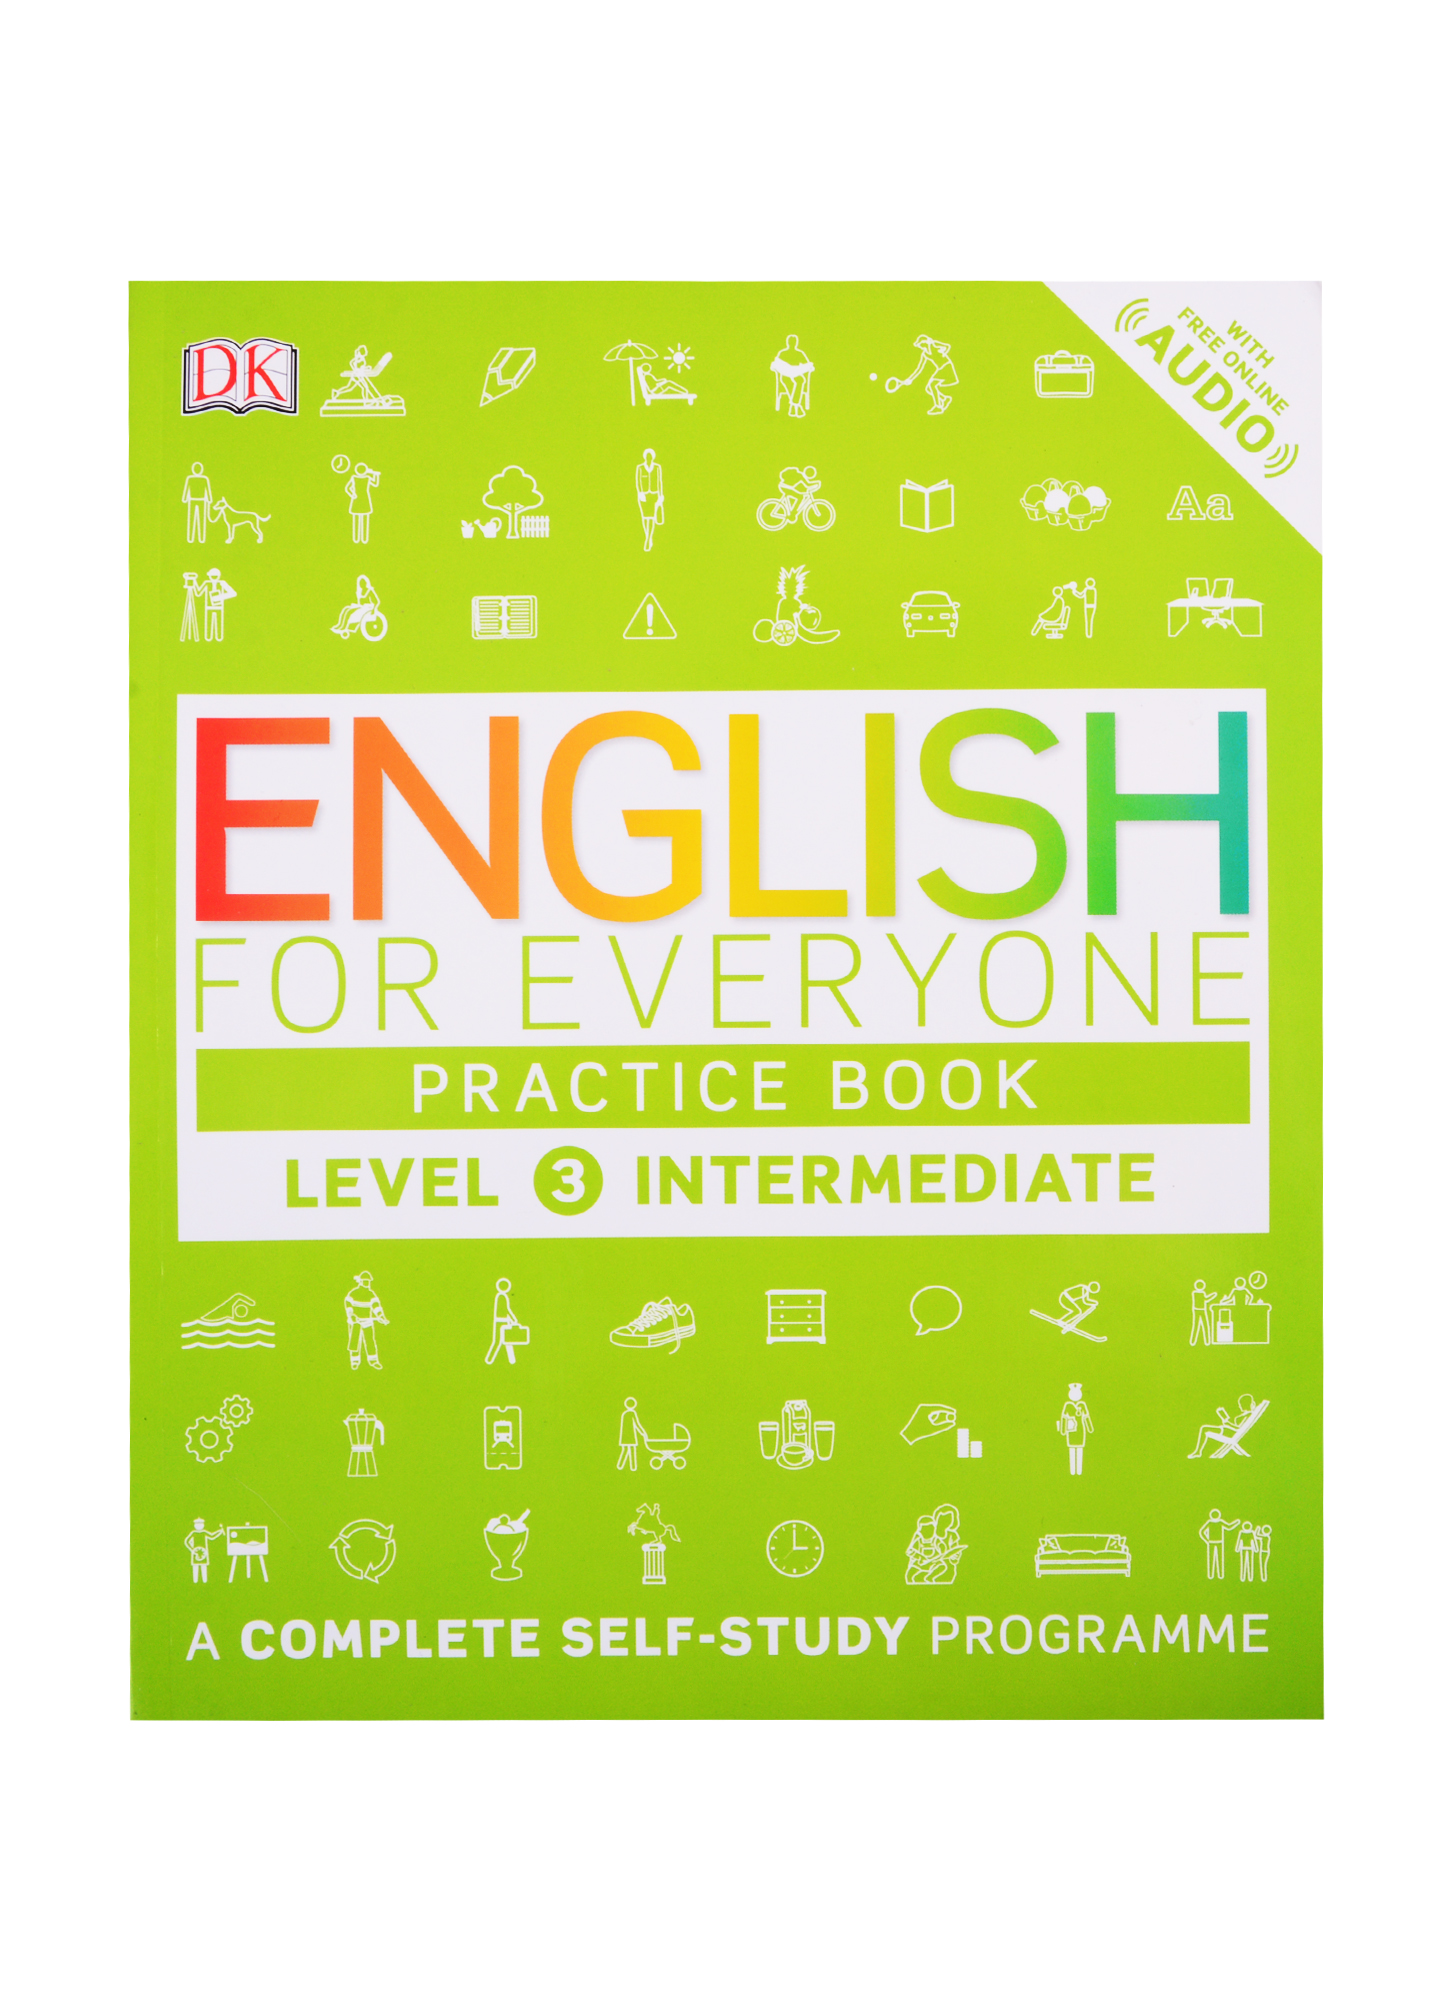 English for Everyone Practice Book Level 3 Intermediate english for everyone practice book level 3 intermediate